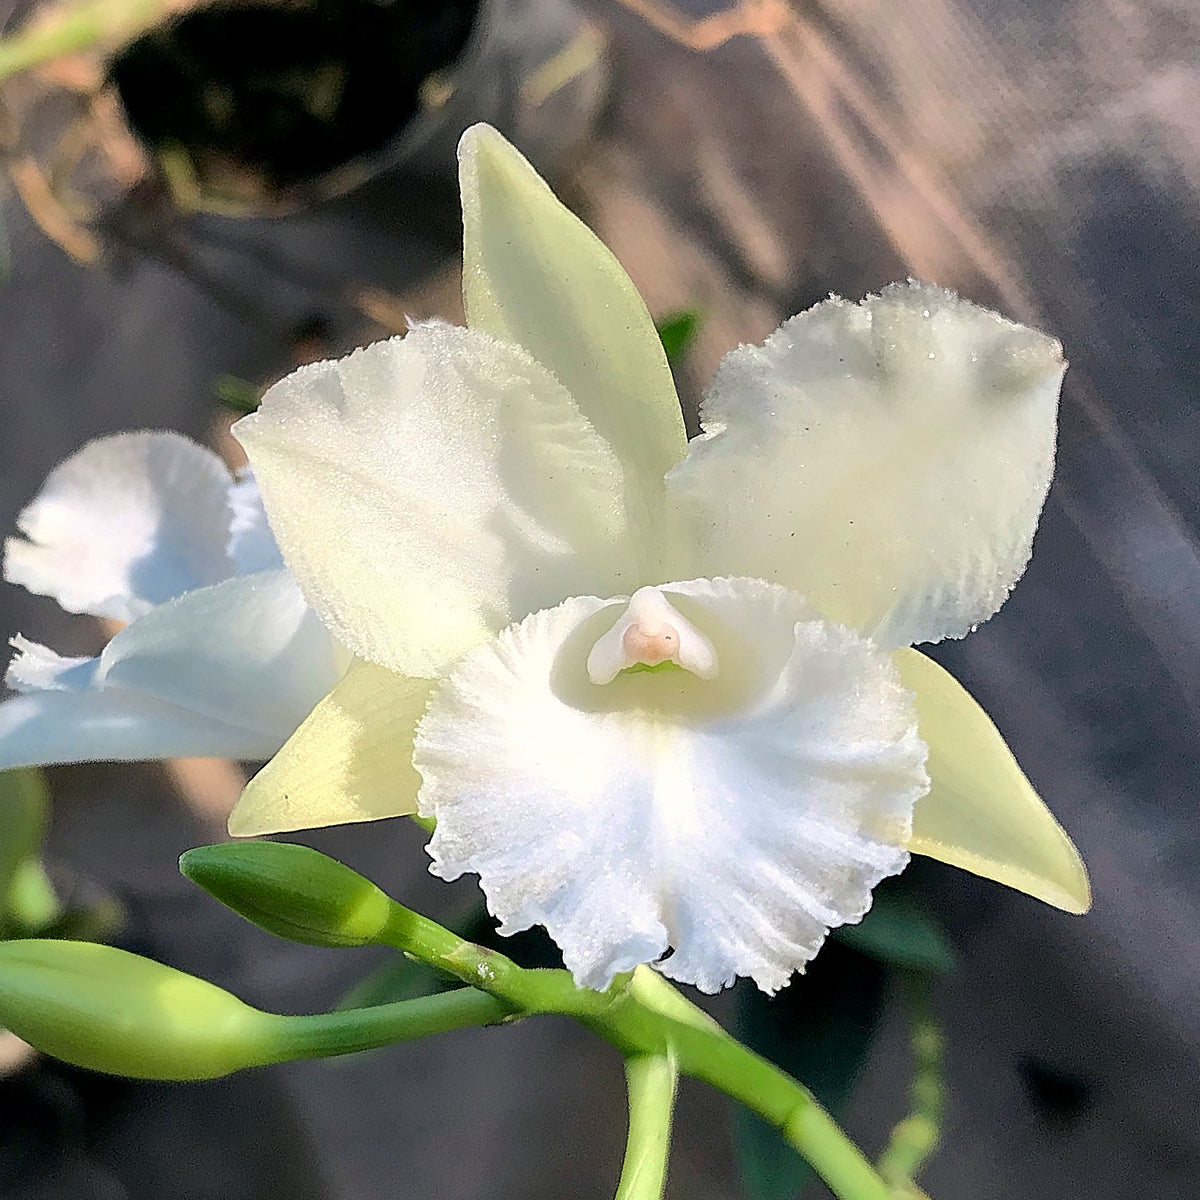 Captivating Cattleytonia Batalinii Maui Maid White Orchid – Pure Elegance in Bloom for Your Home Garden